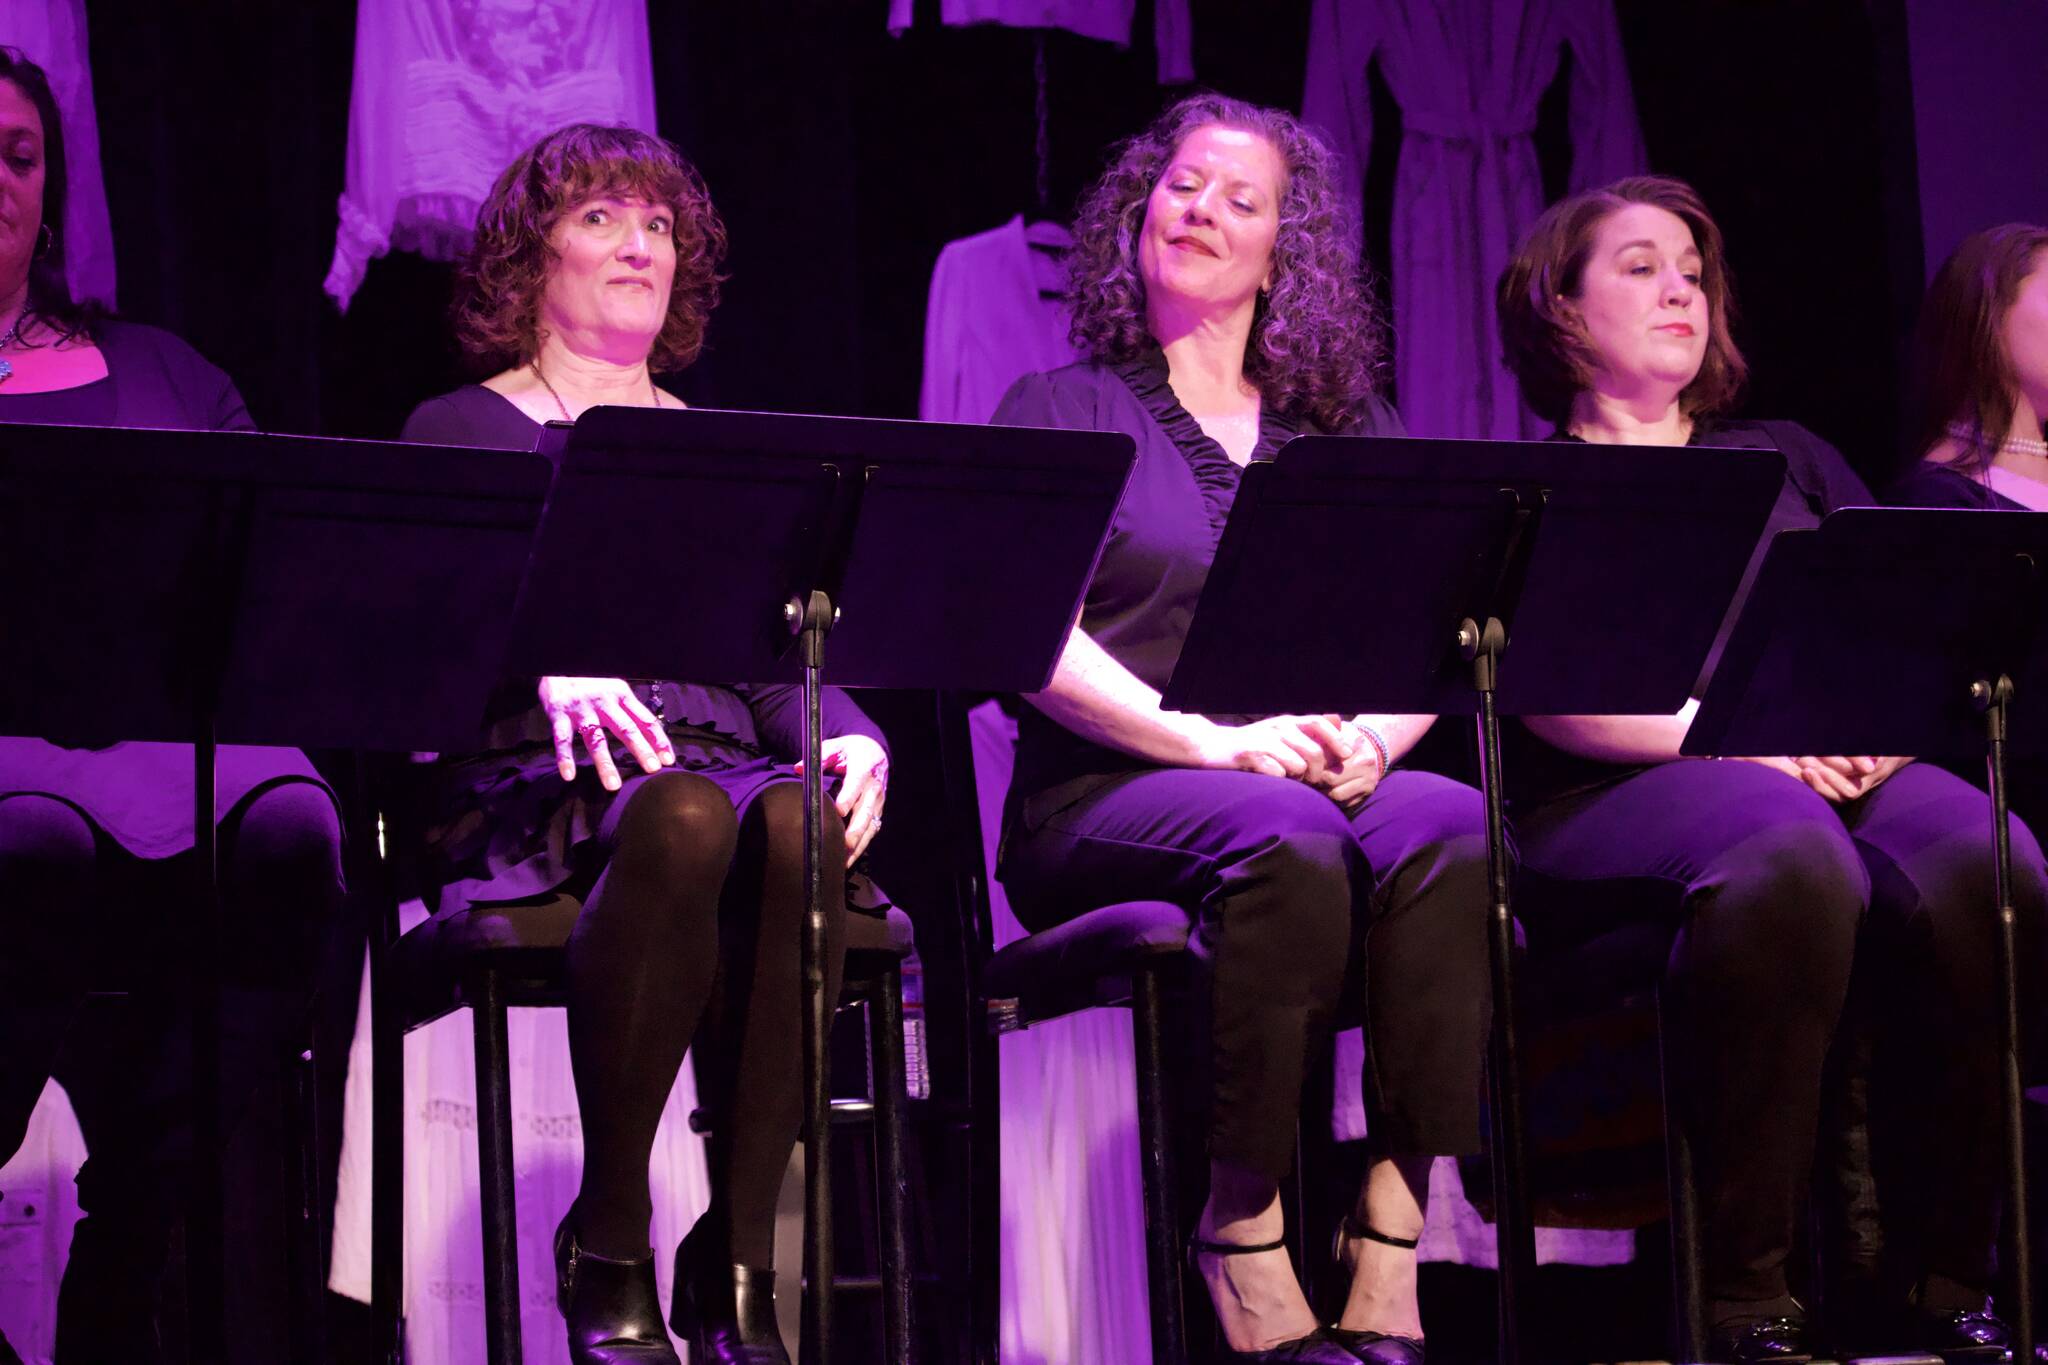 Photo by Rachel Rosen/Whidbey News-Times
From left, Susie Thompson, Nicole Bouvion and Dianna Gruenwald star in the all-woman play “Love, Loss and What I Wore.”